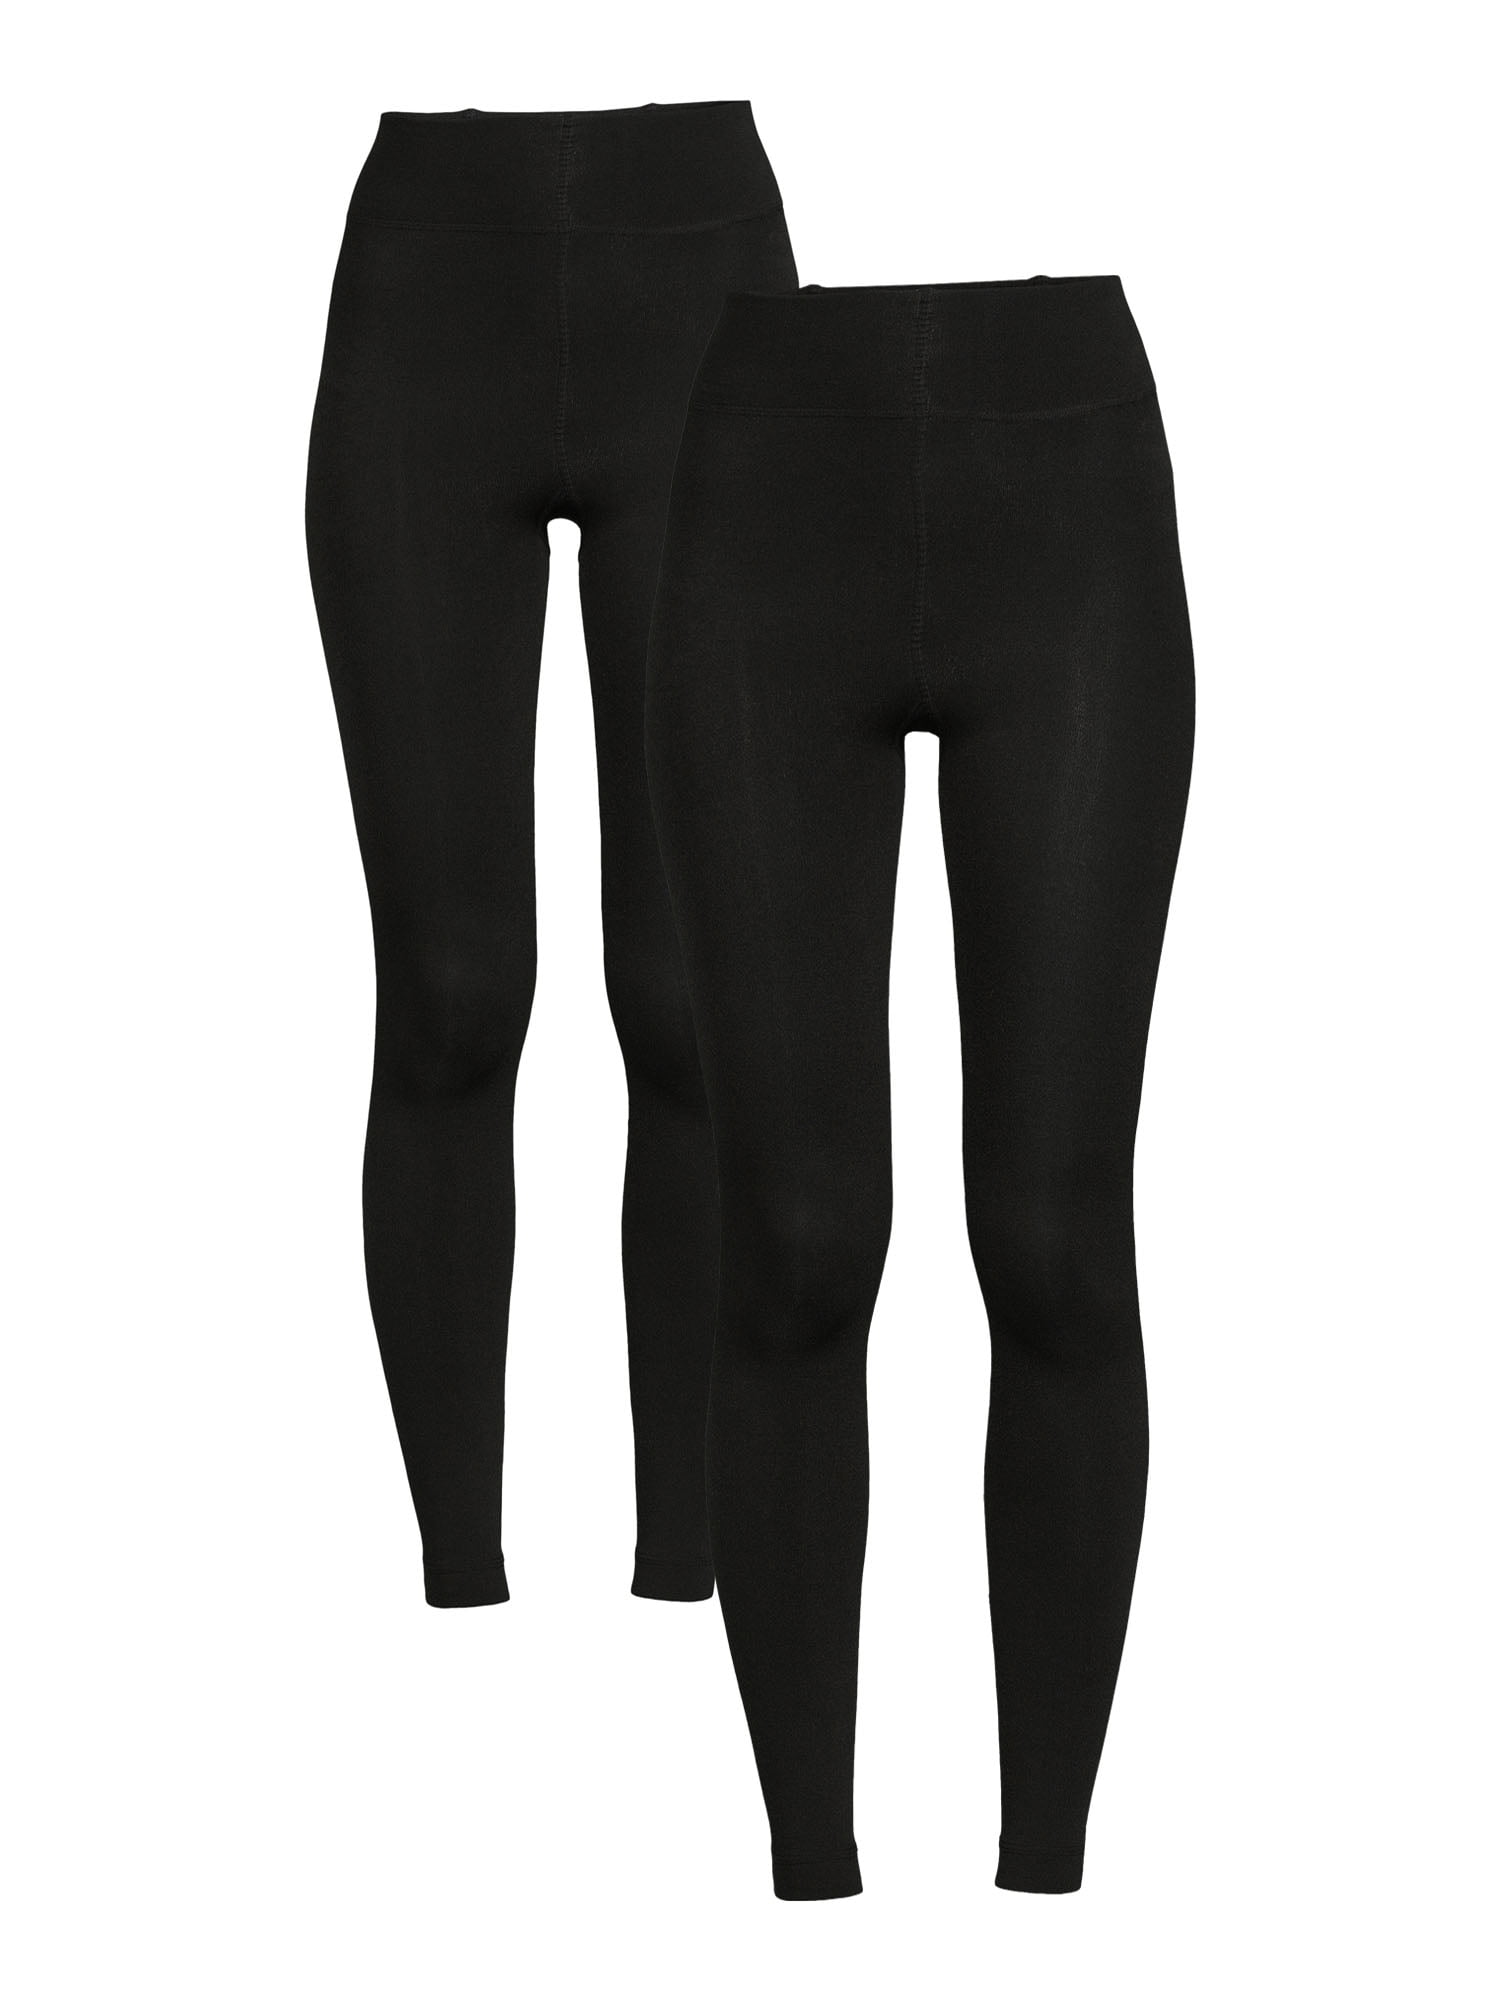  YOLIX 2 Pack Thick Fleece Lined Leggings Women with